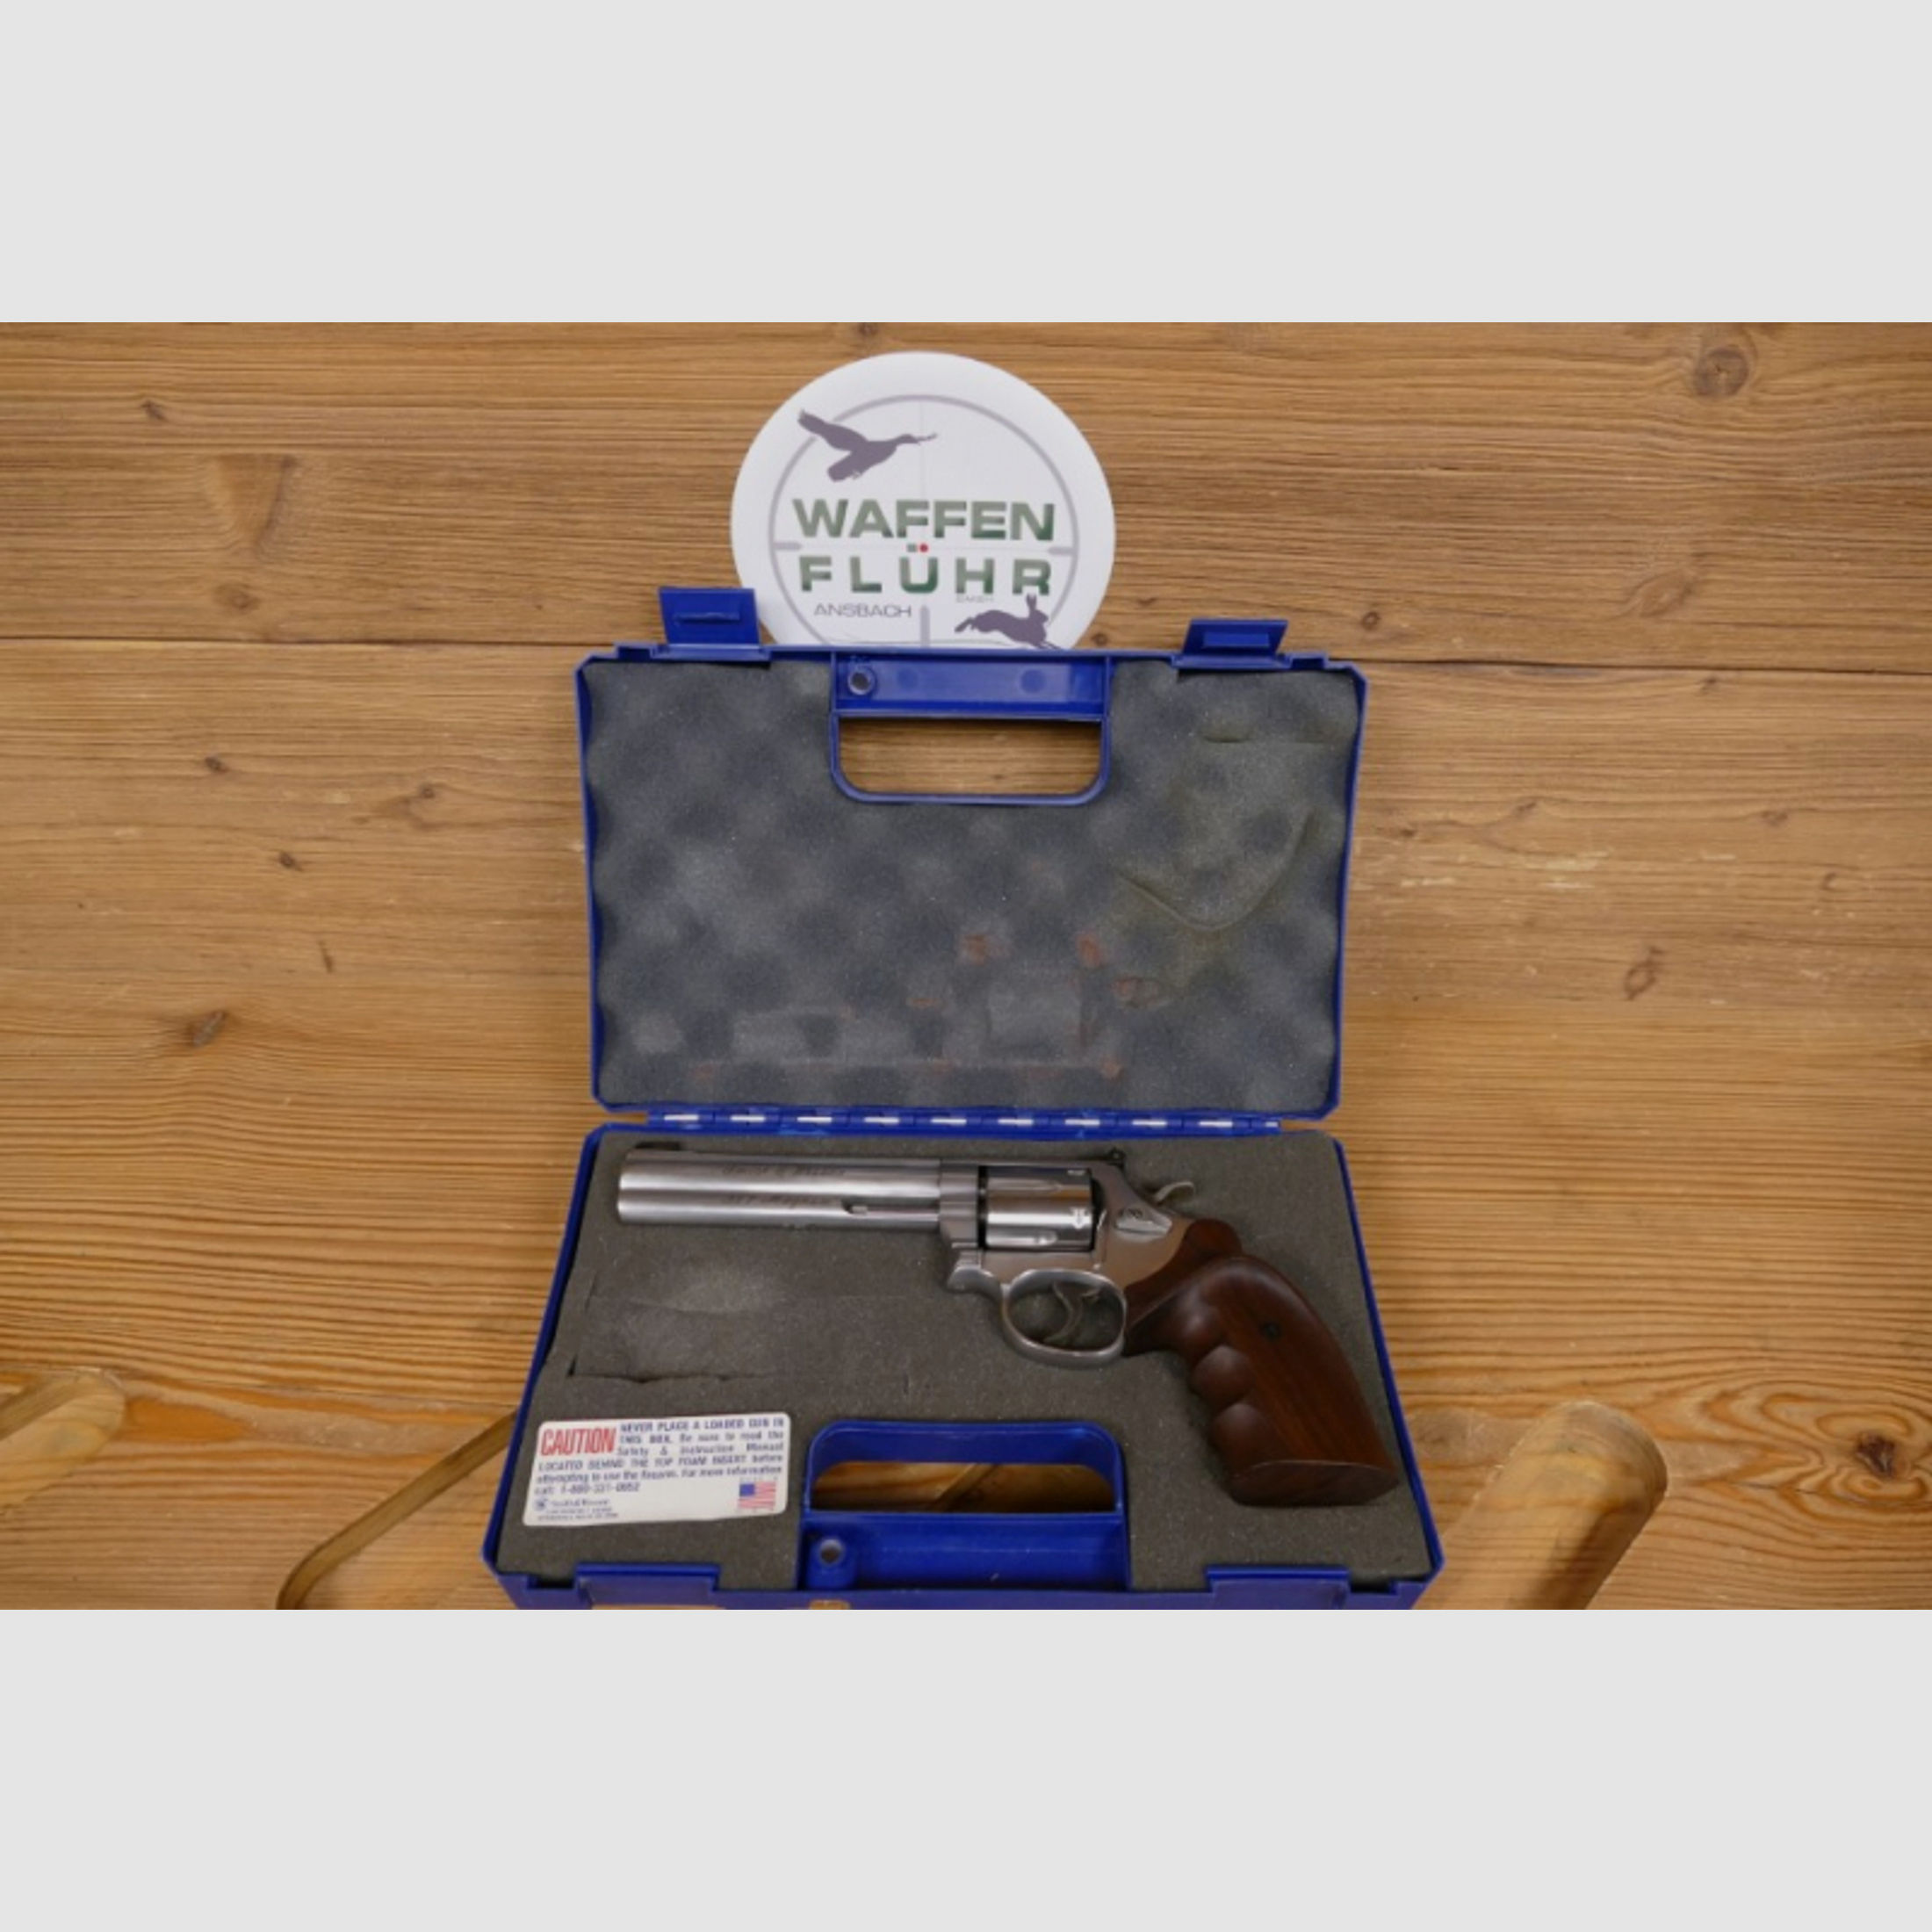 Smith & Wesson Revolver 686 Target Champion .357 Mag. 6 Zoll stainless WAFFEN FLÜHR ANSBACH